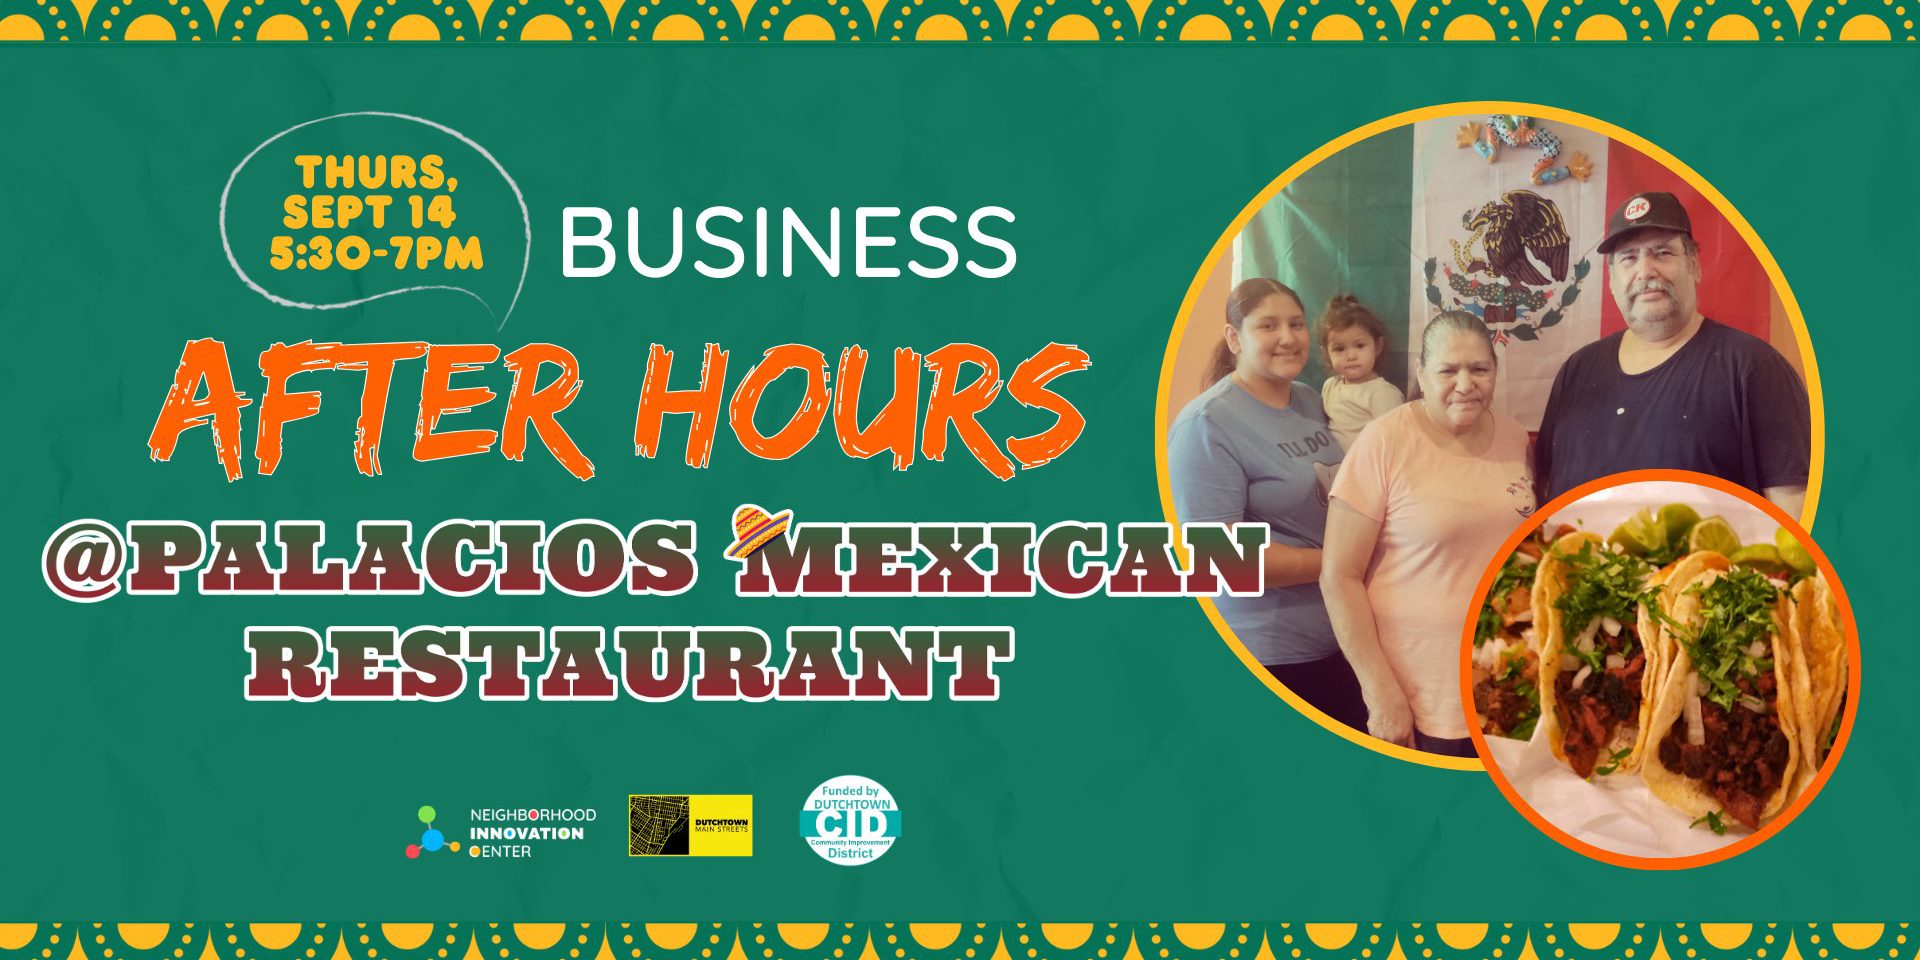 Business After Hours at Palacios Mexican Restaurant. The image features a photo of the business owners and tacos from the restaurant's menu.